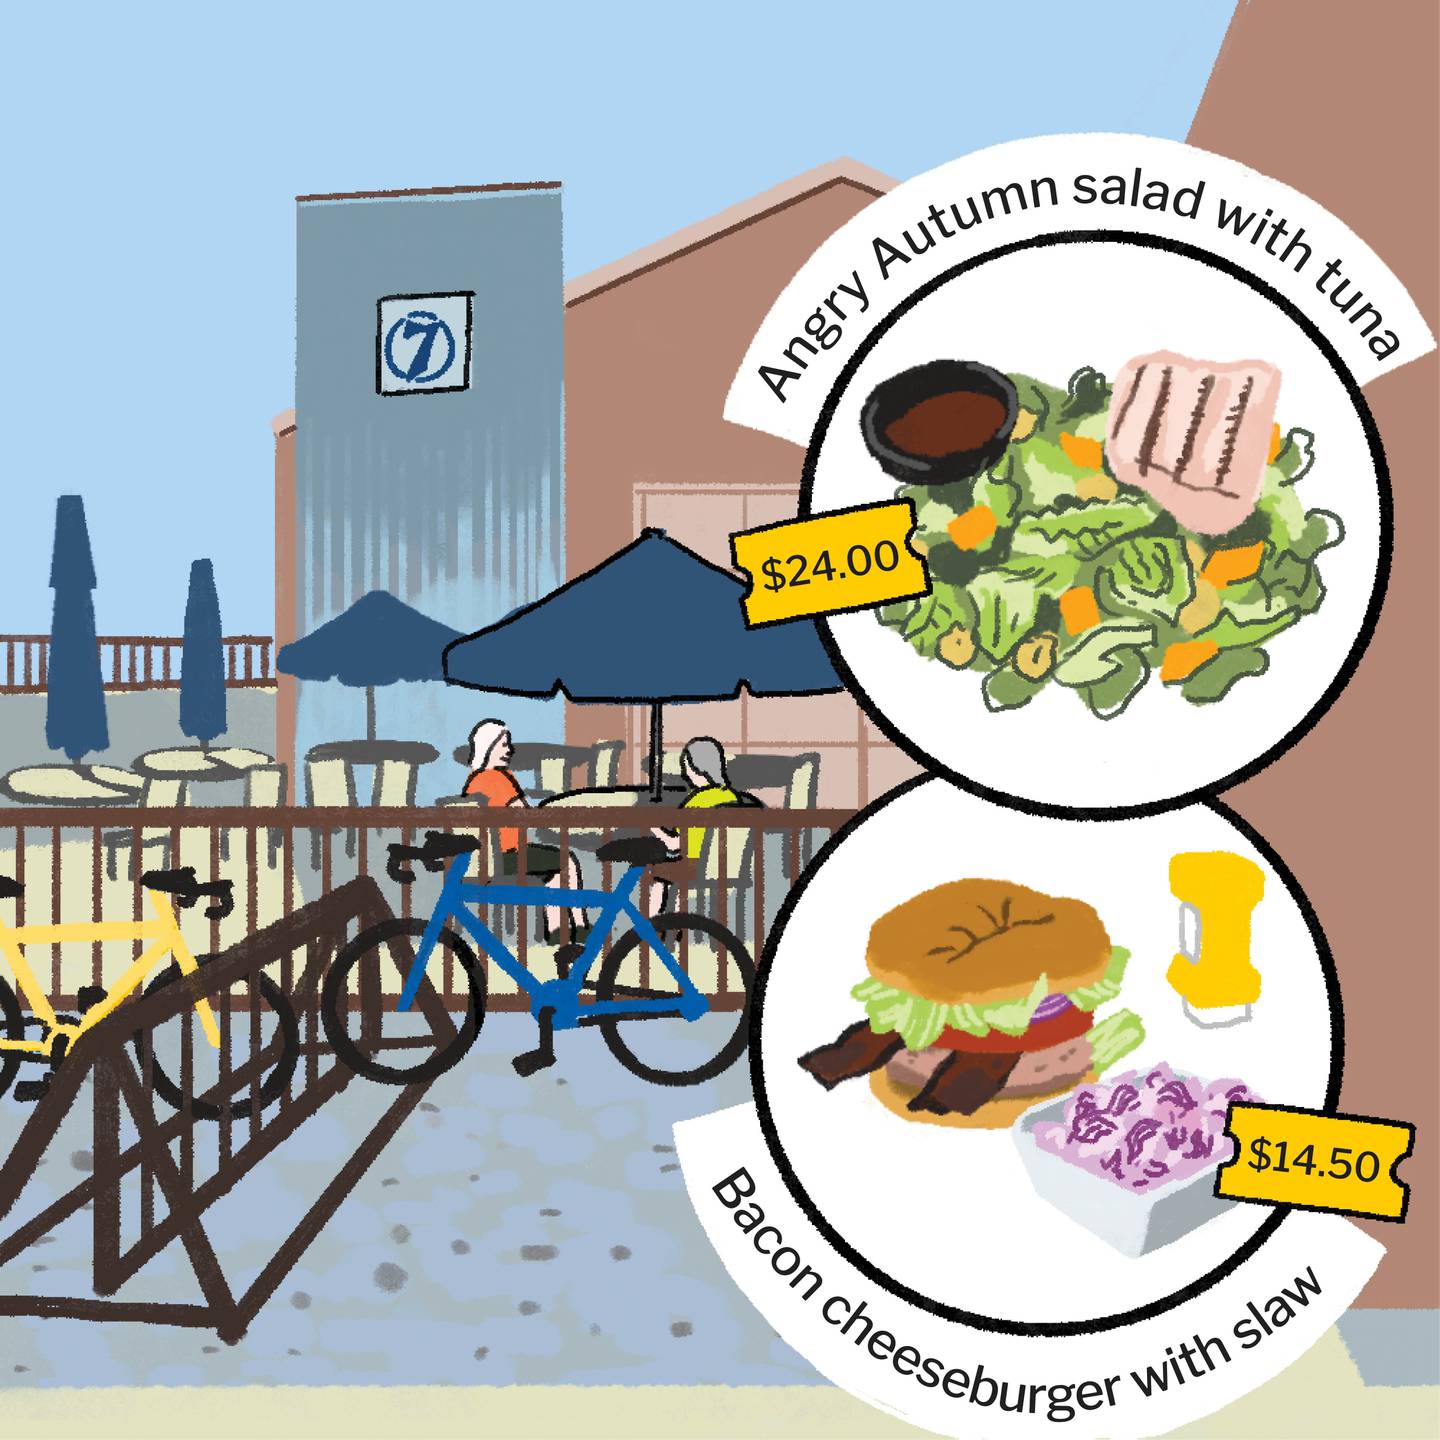 Illustration of the exterior of a restaurant with outdoor seating in a fenced-off patio. In the foreground in front of the patio is a bike rack with several bikes in it. The illustration includes two insets showing an Angry Autumn salad with a piece of grilled tuna ($24) and a bacon cheeseburger burger with cole slaw ($14.50).